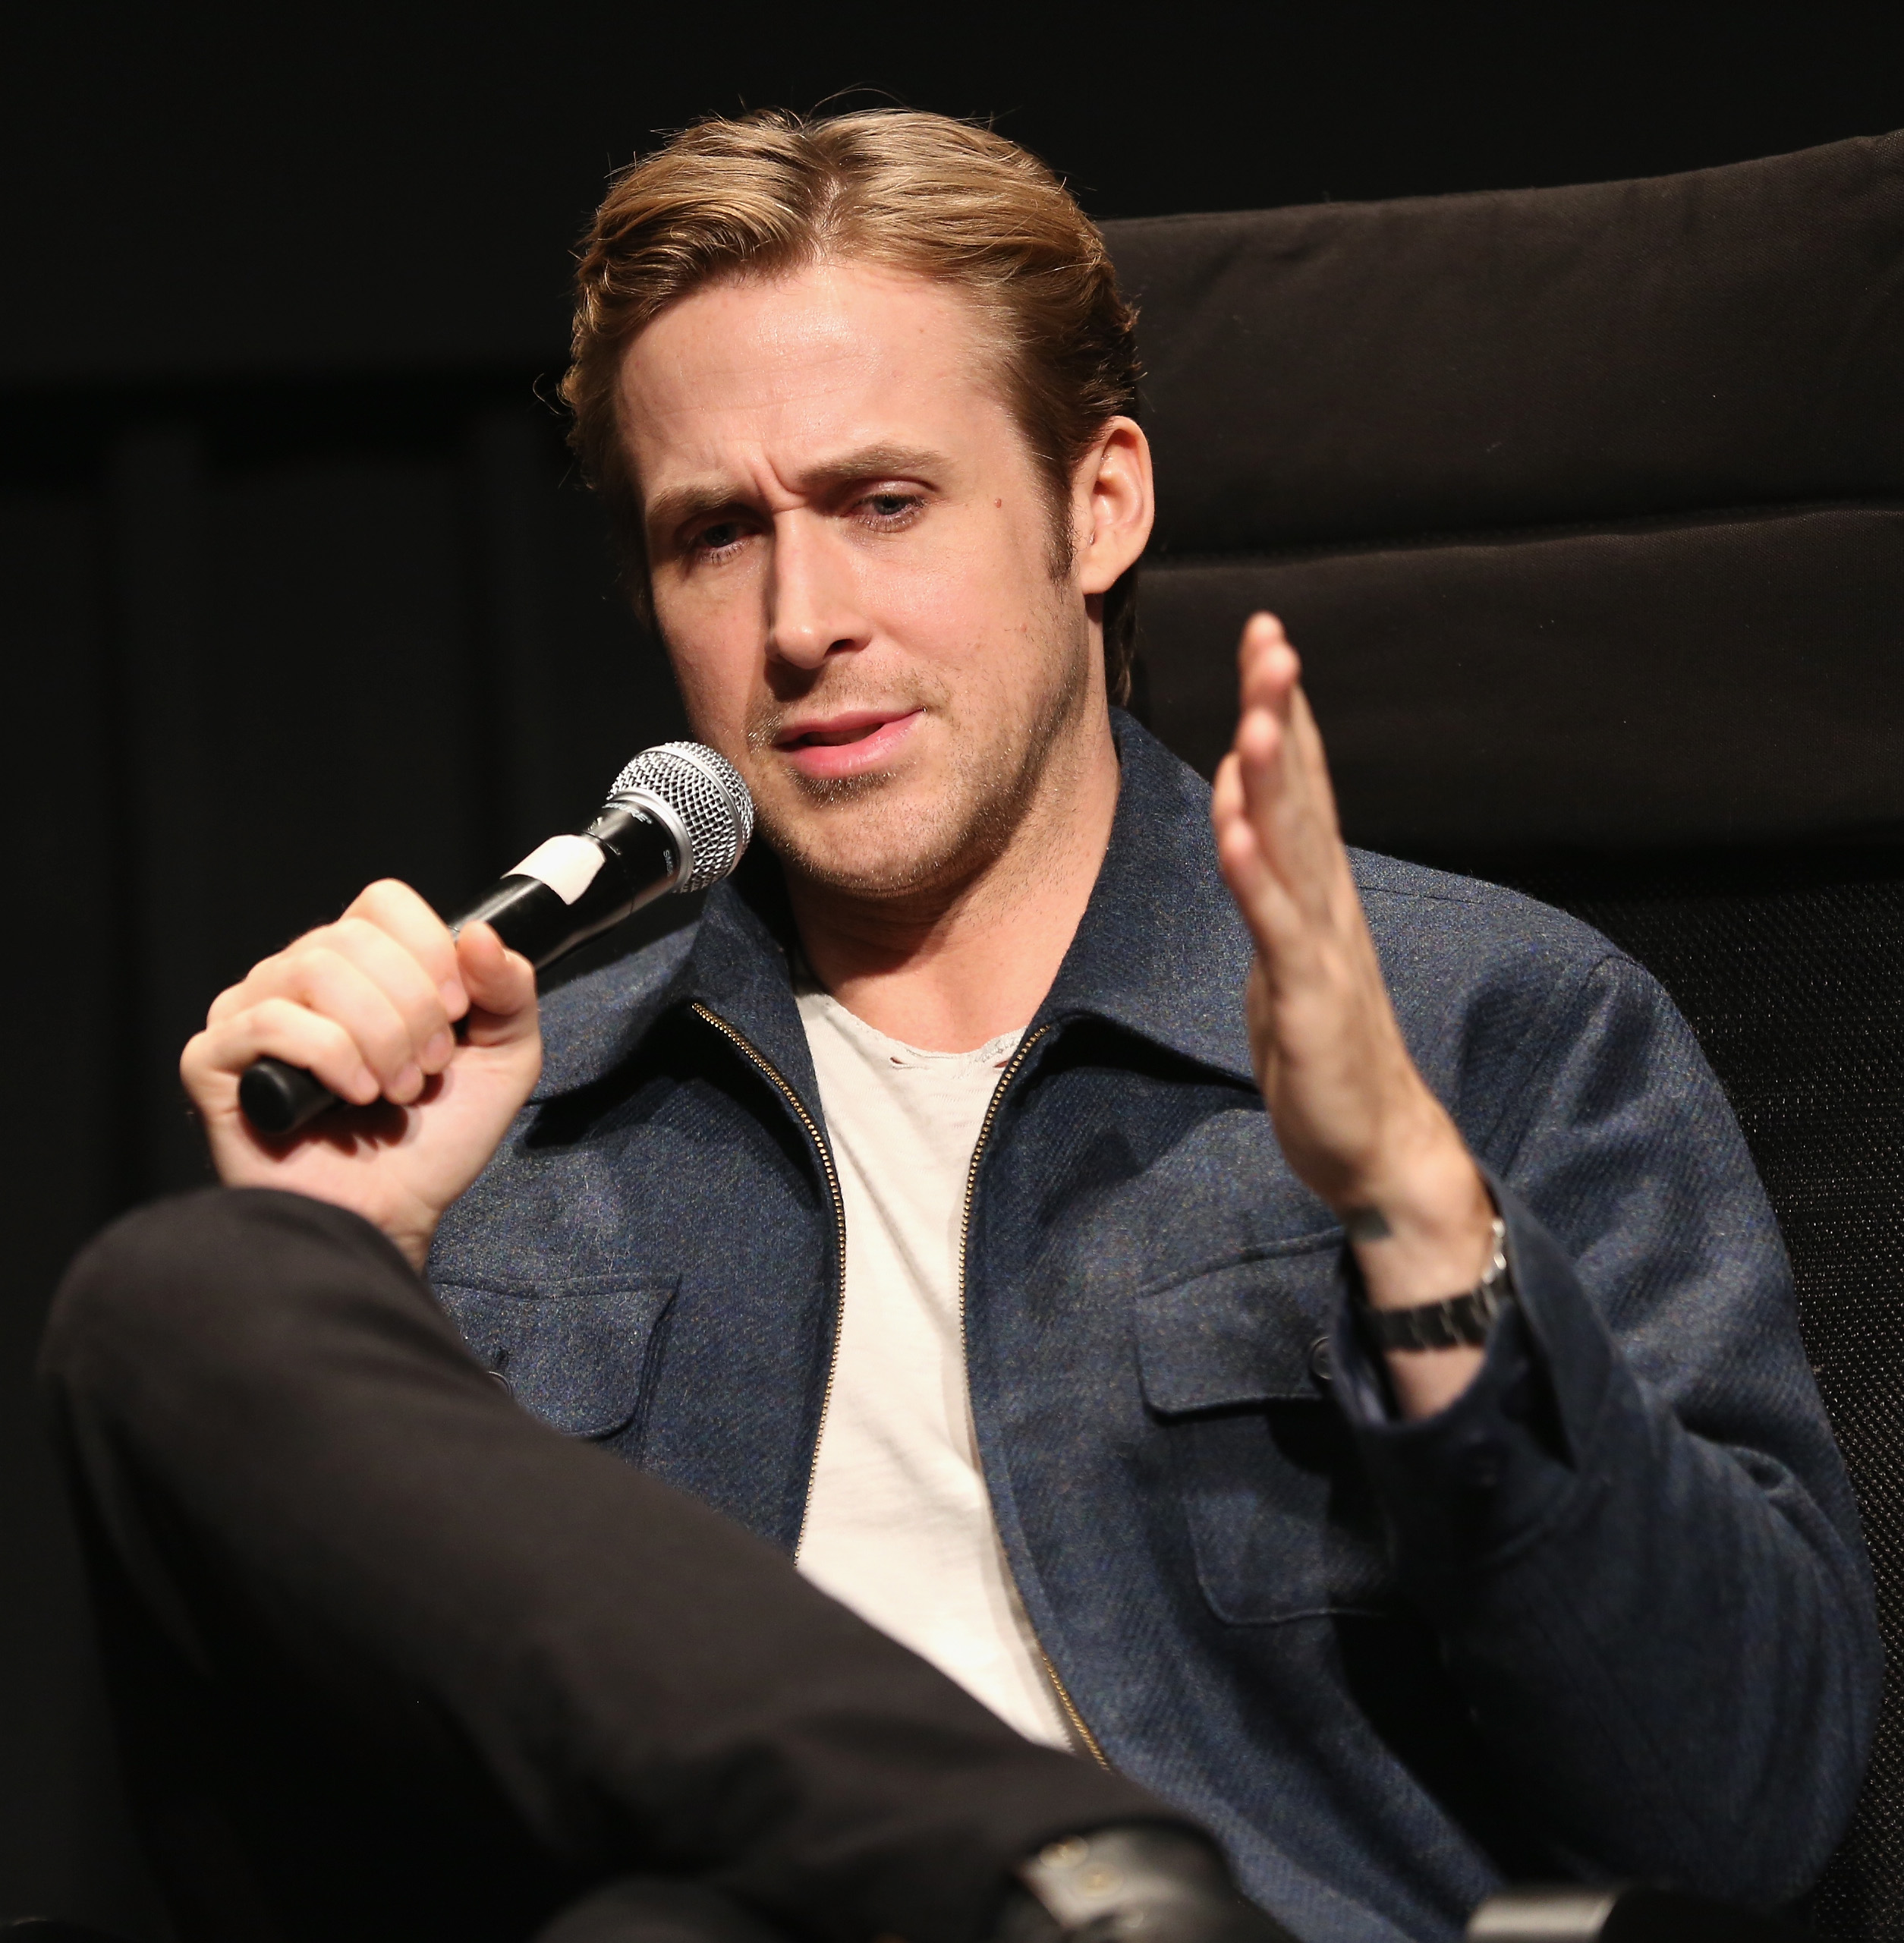 Ryan Gosling speaks during an official Academy screening of "The Big Short" on December 7, 2015 in New York City | Source: Getty Images